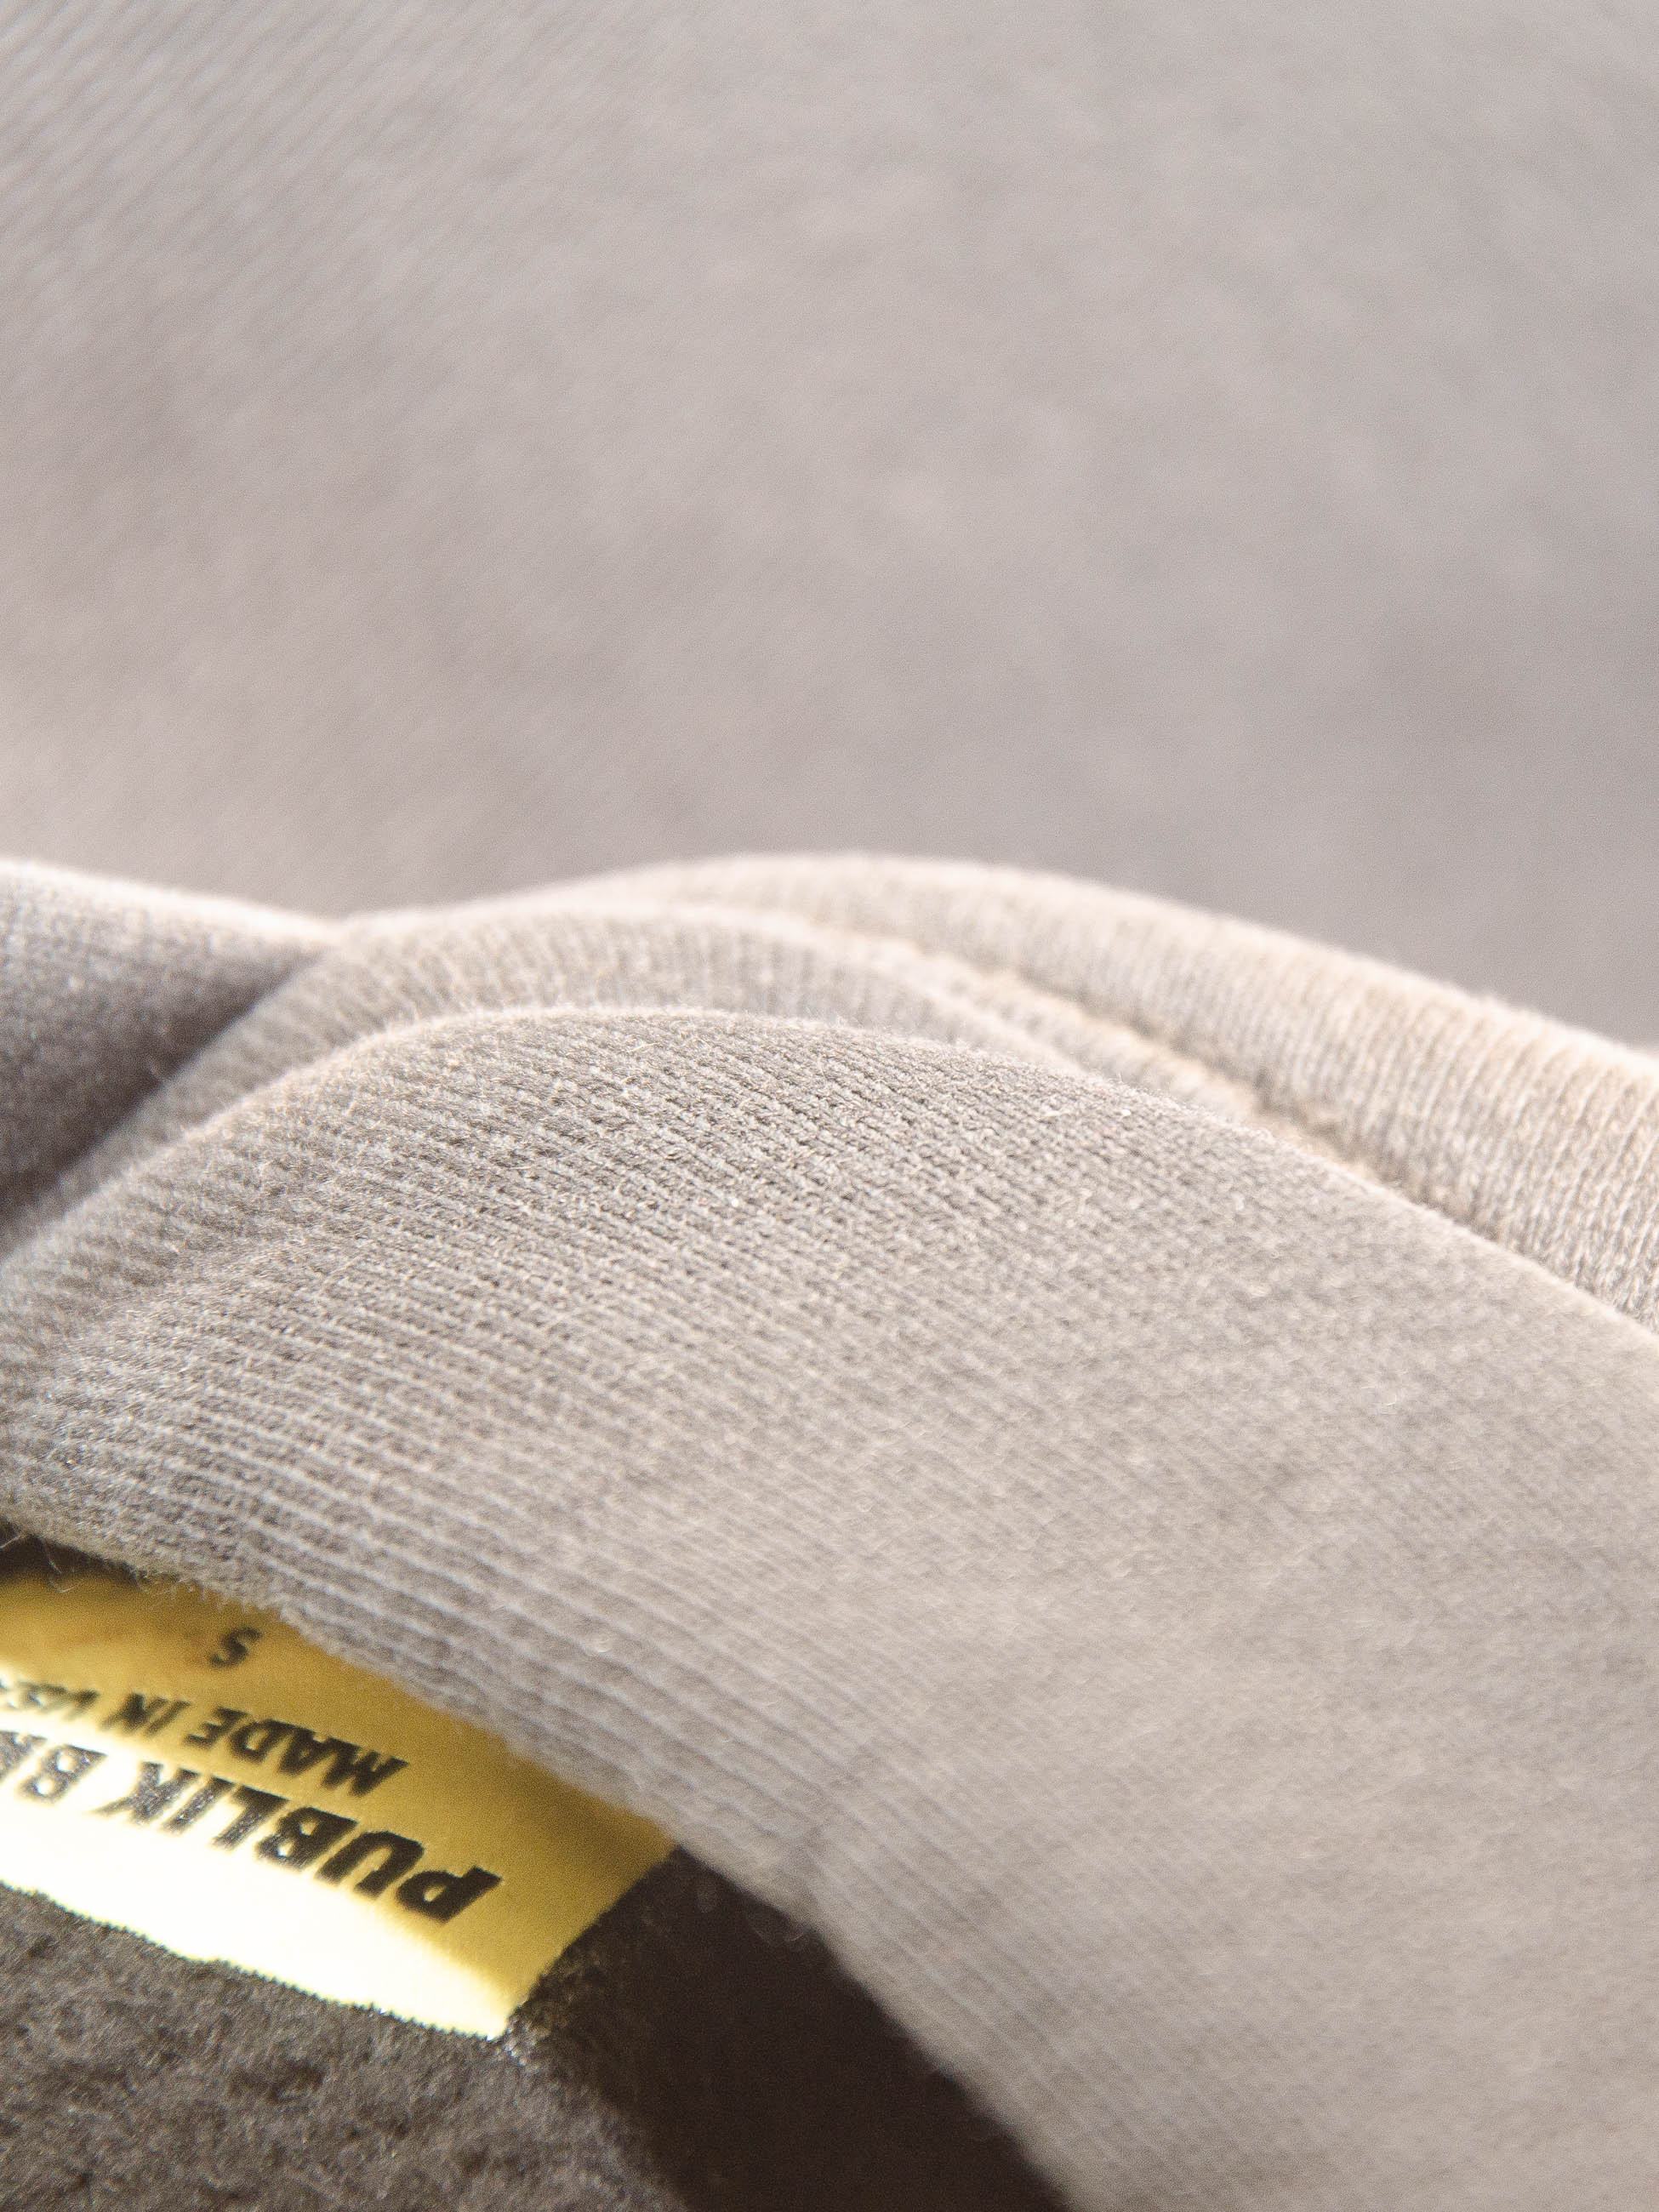 Publik Brand Single Layered Hoodie Ash Gray Heavyweight Fleece, all made in USA, size label, detail  of hood neckline